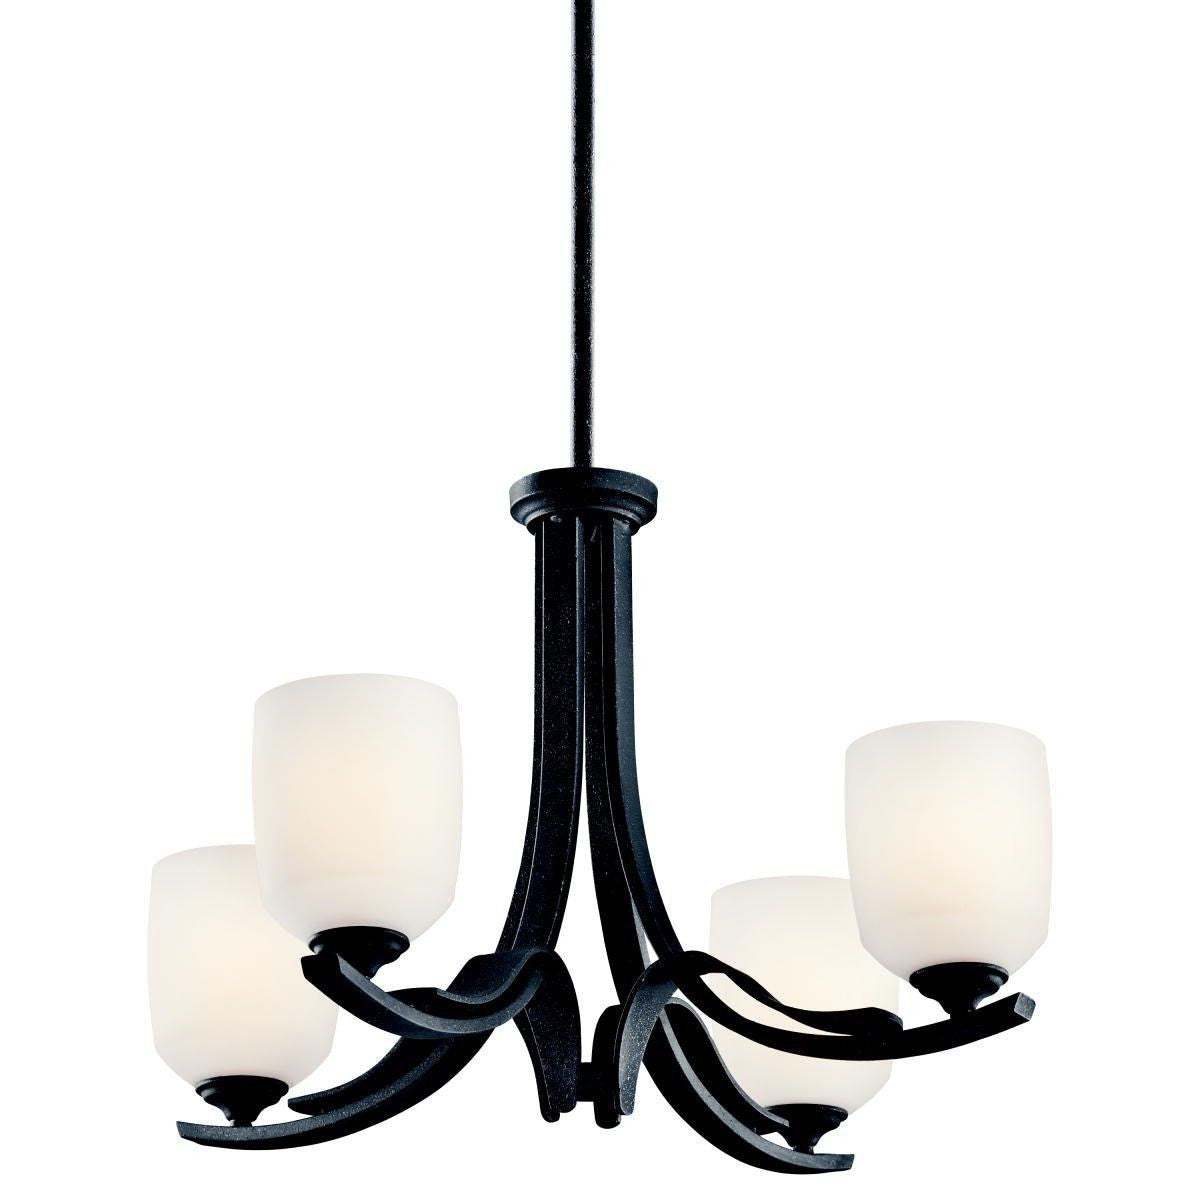 Aztec 34935 by Kichler Lighting Breton Mills Collection Four Light Hanging Mini Chandelier in Distressed Black Finish